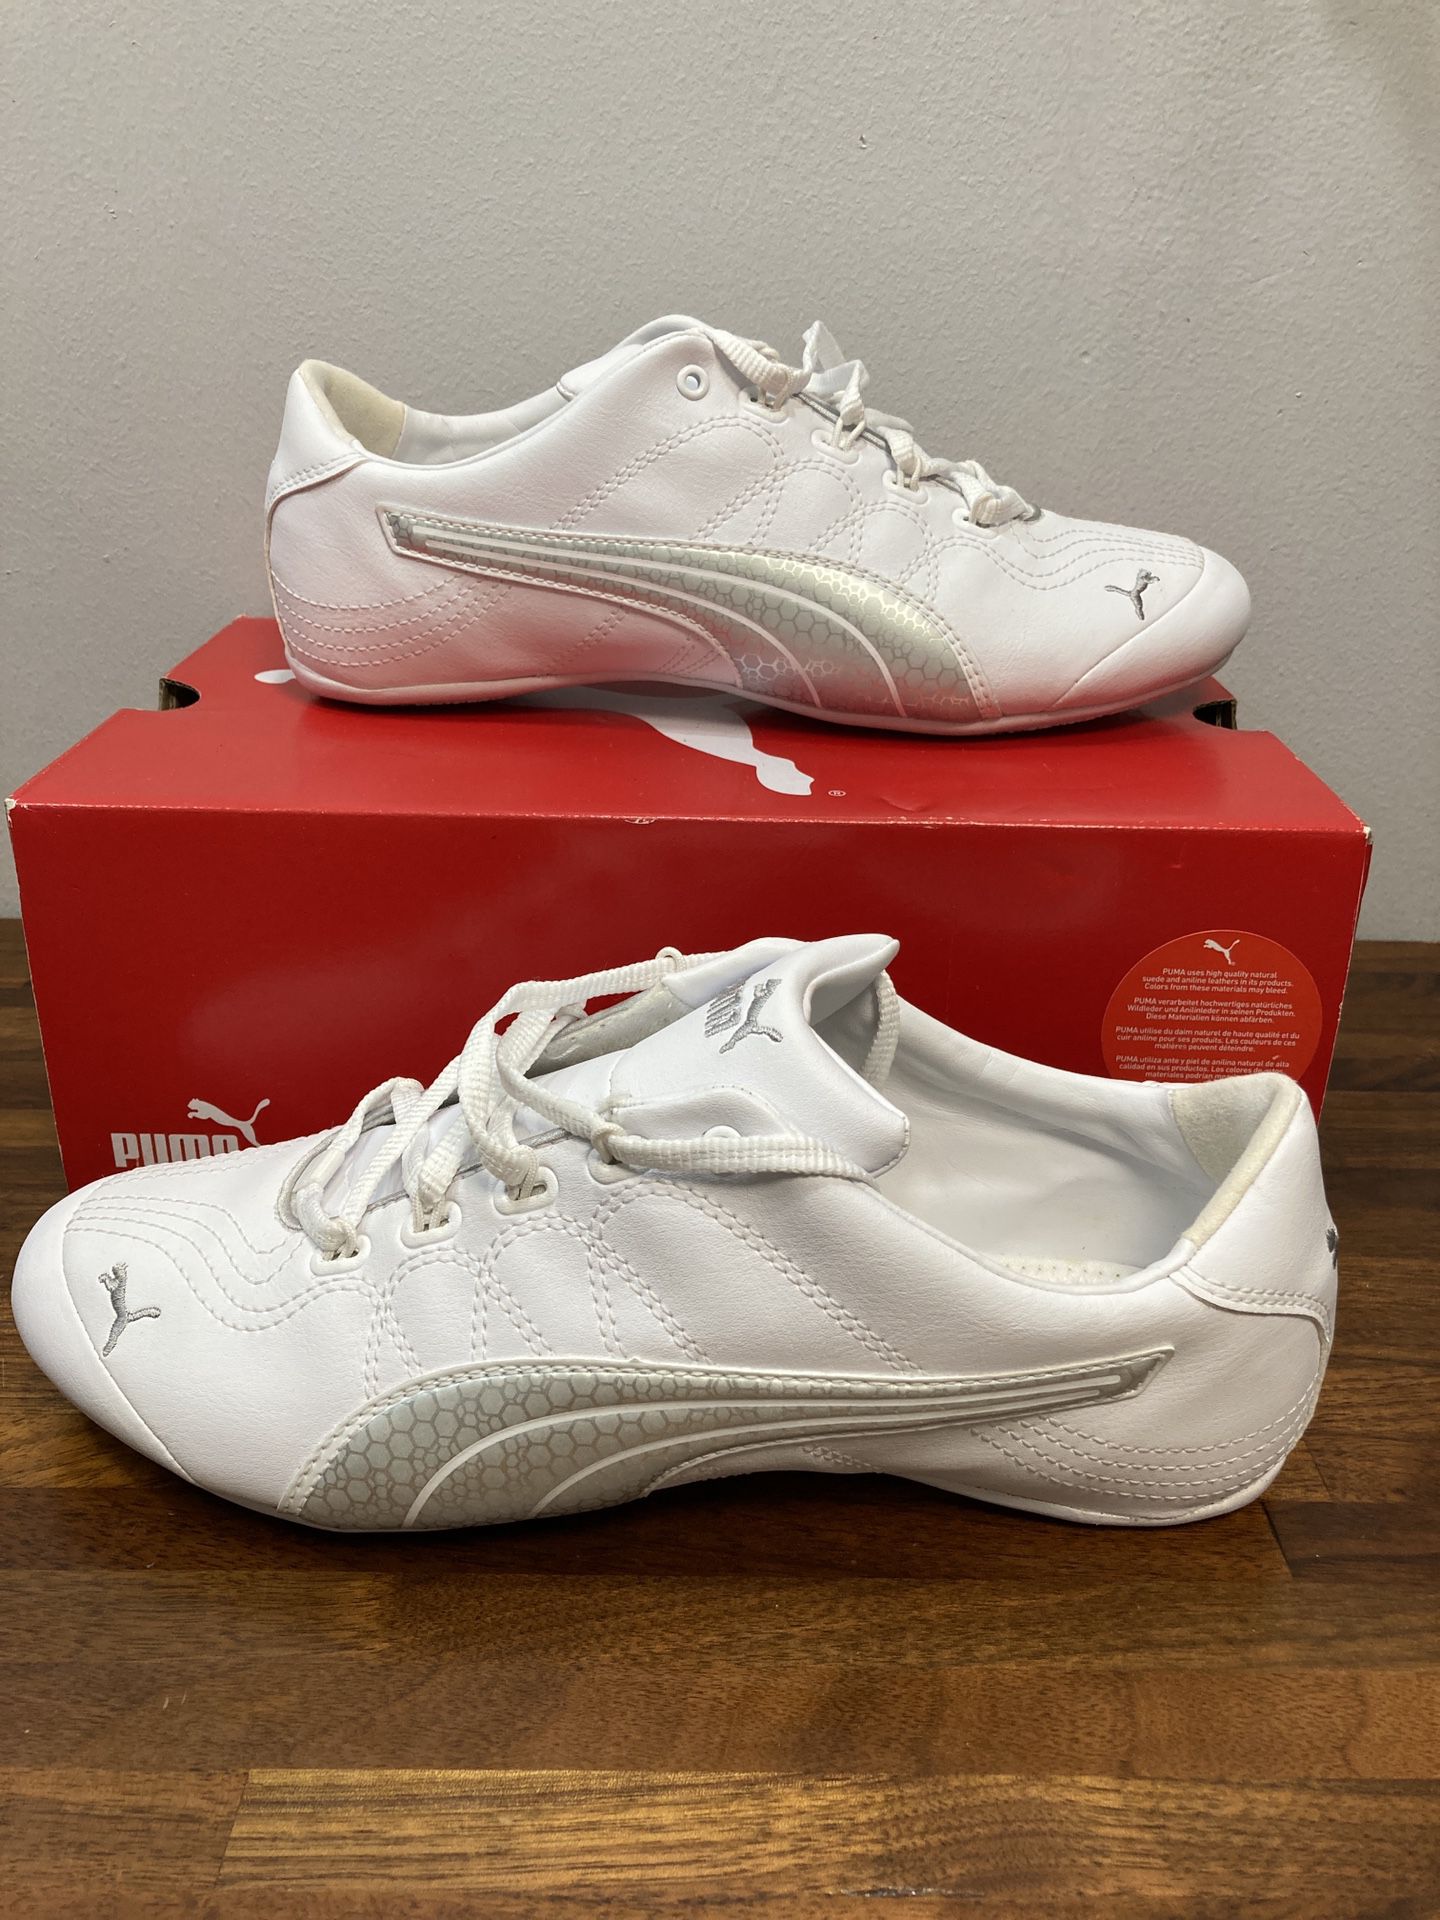 Puma Womens Sneakers Soleil Size 8 for Sale in Garden City - OfferUp